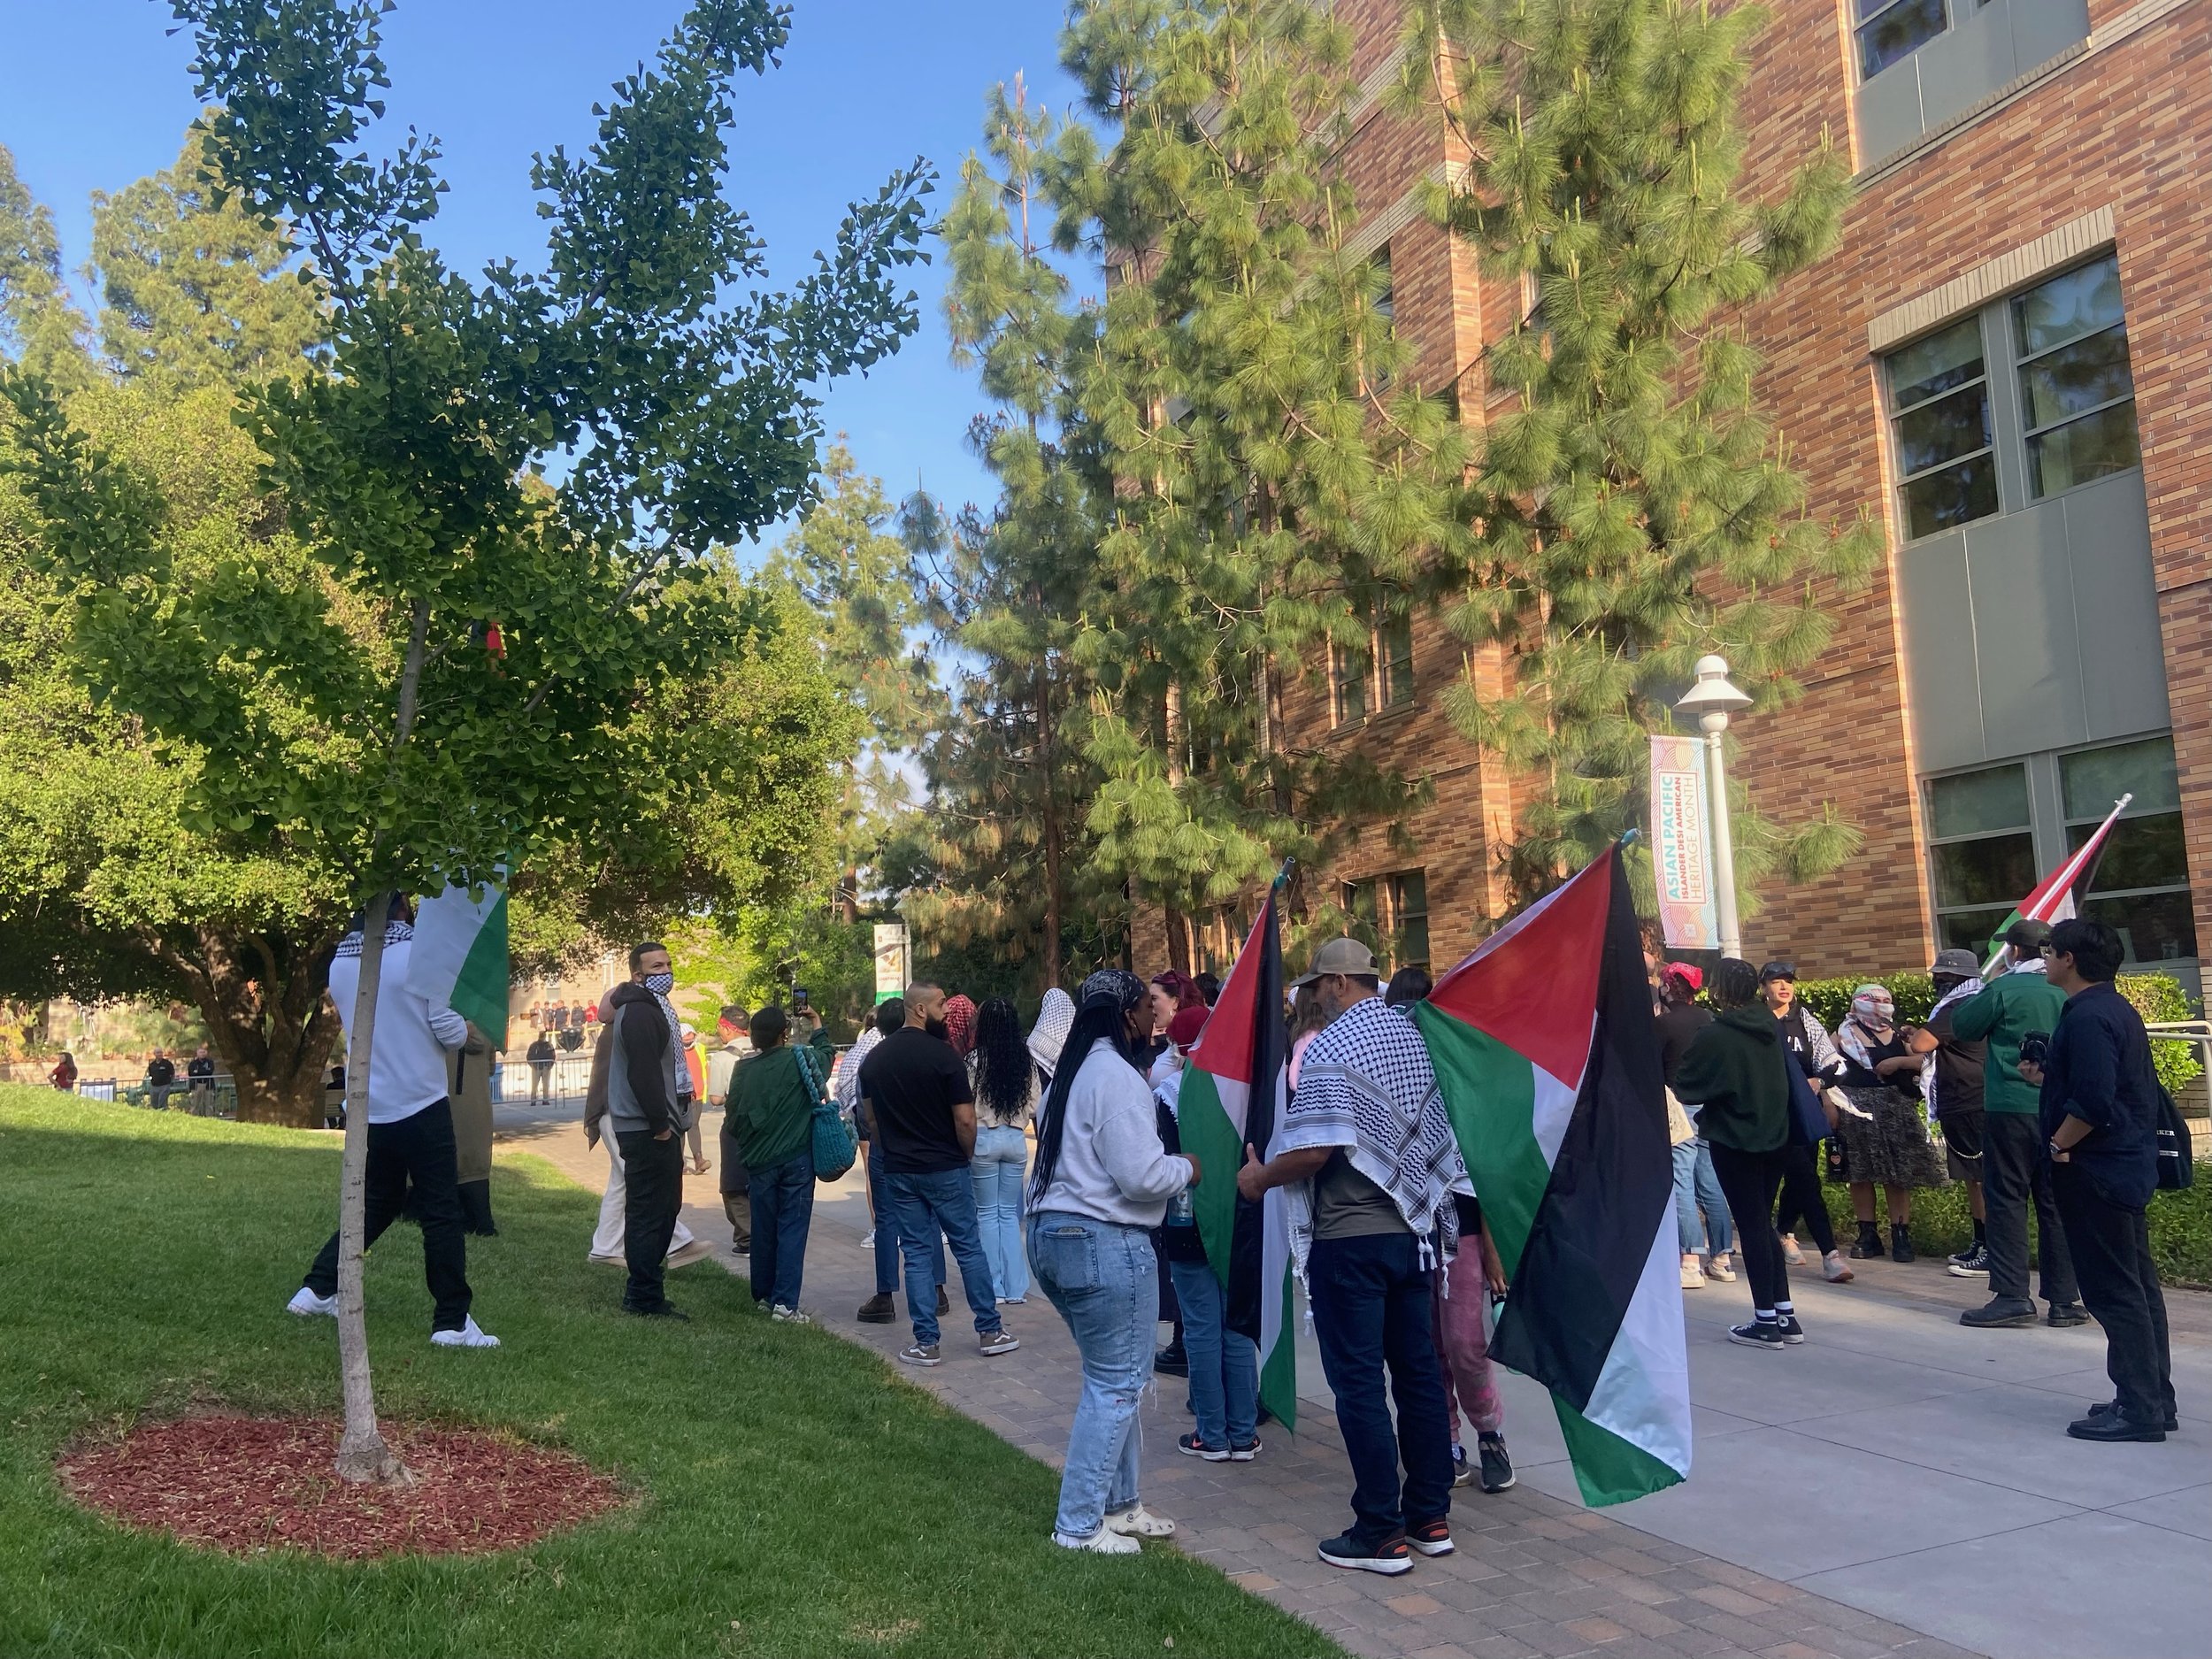    Protestors march with Palestinian flags on May 2. Photo by KIANA KALAHELE, News Editor   